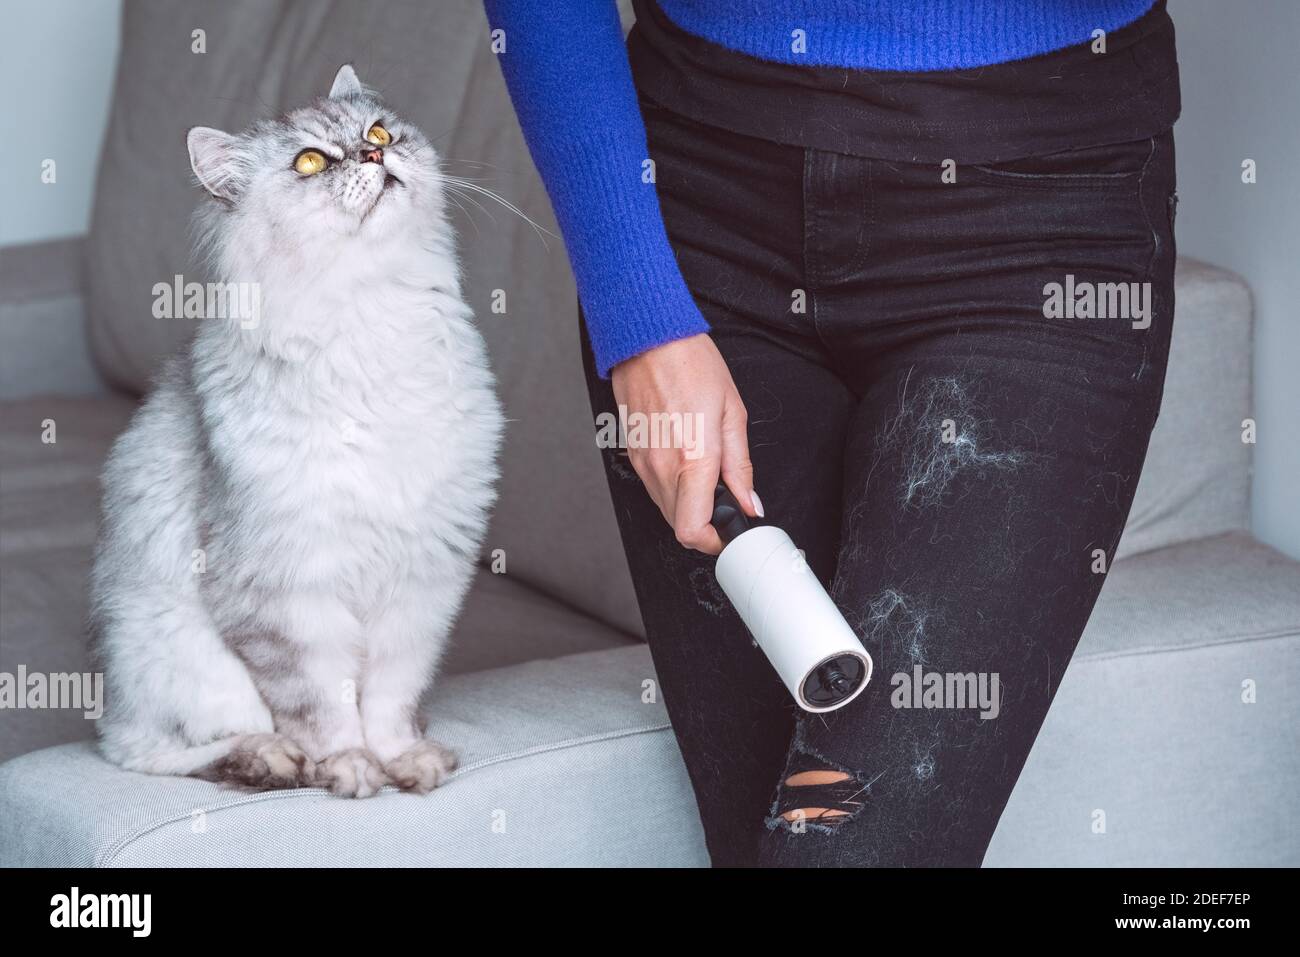 Woman cleaning clothes with clothes roller, lint roller or sticky roller  from cats hair. Cats hair on clothes. Cleaning hair from pets Stock Photo -  Alamy